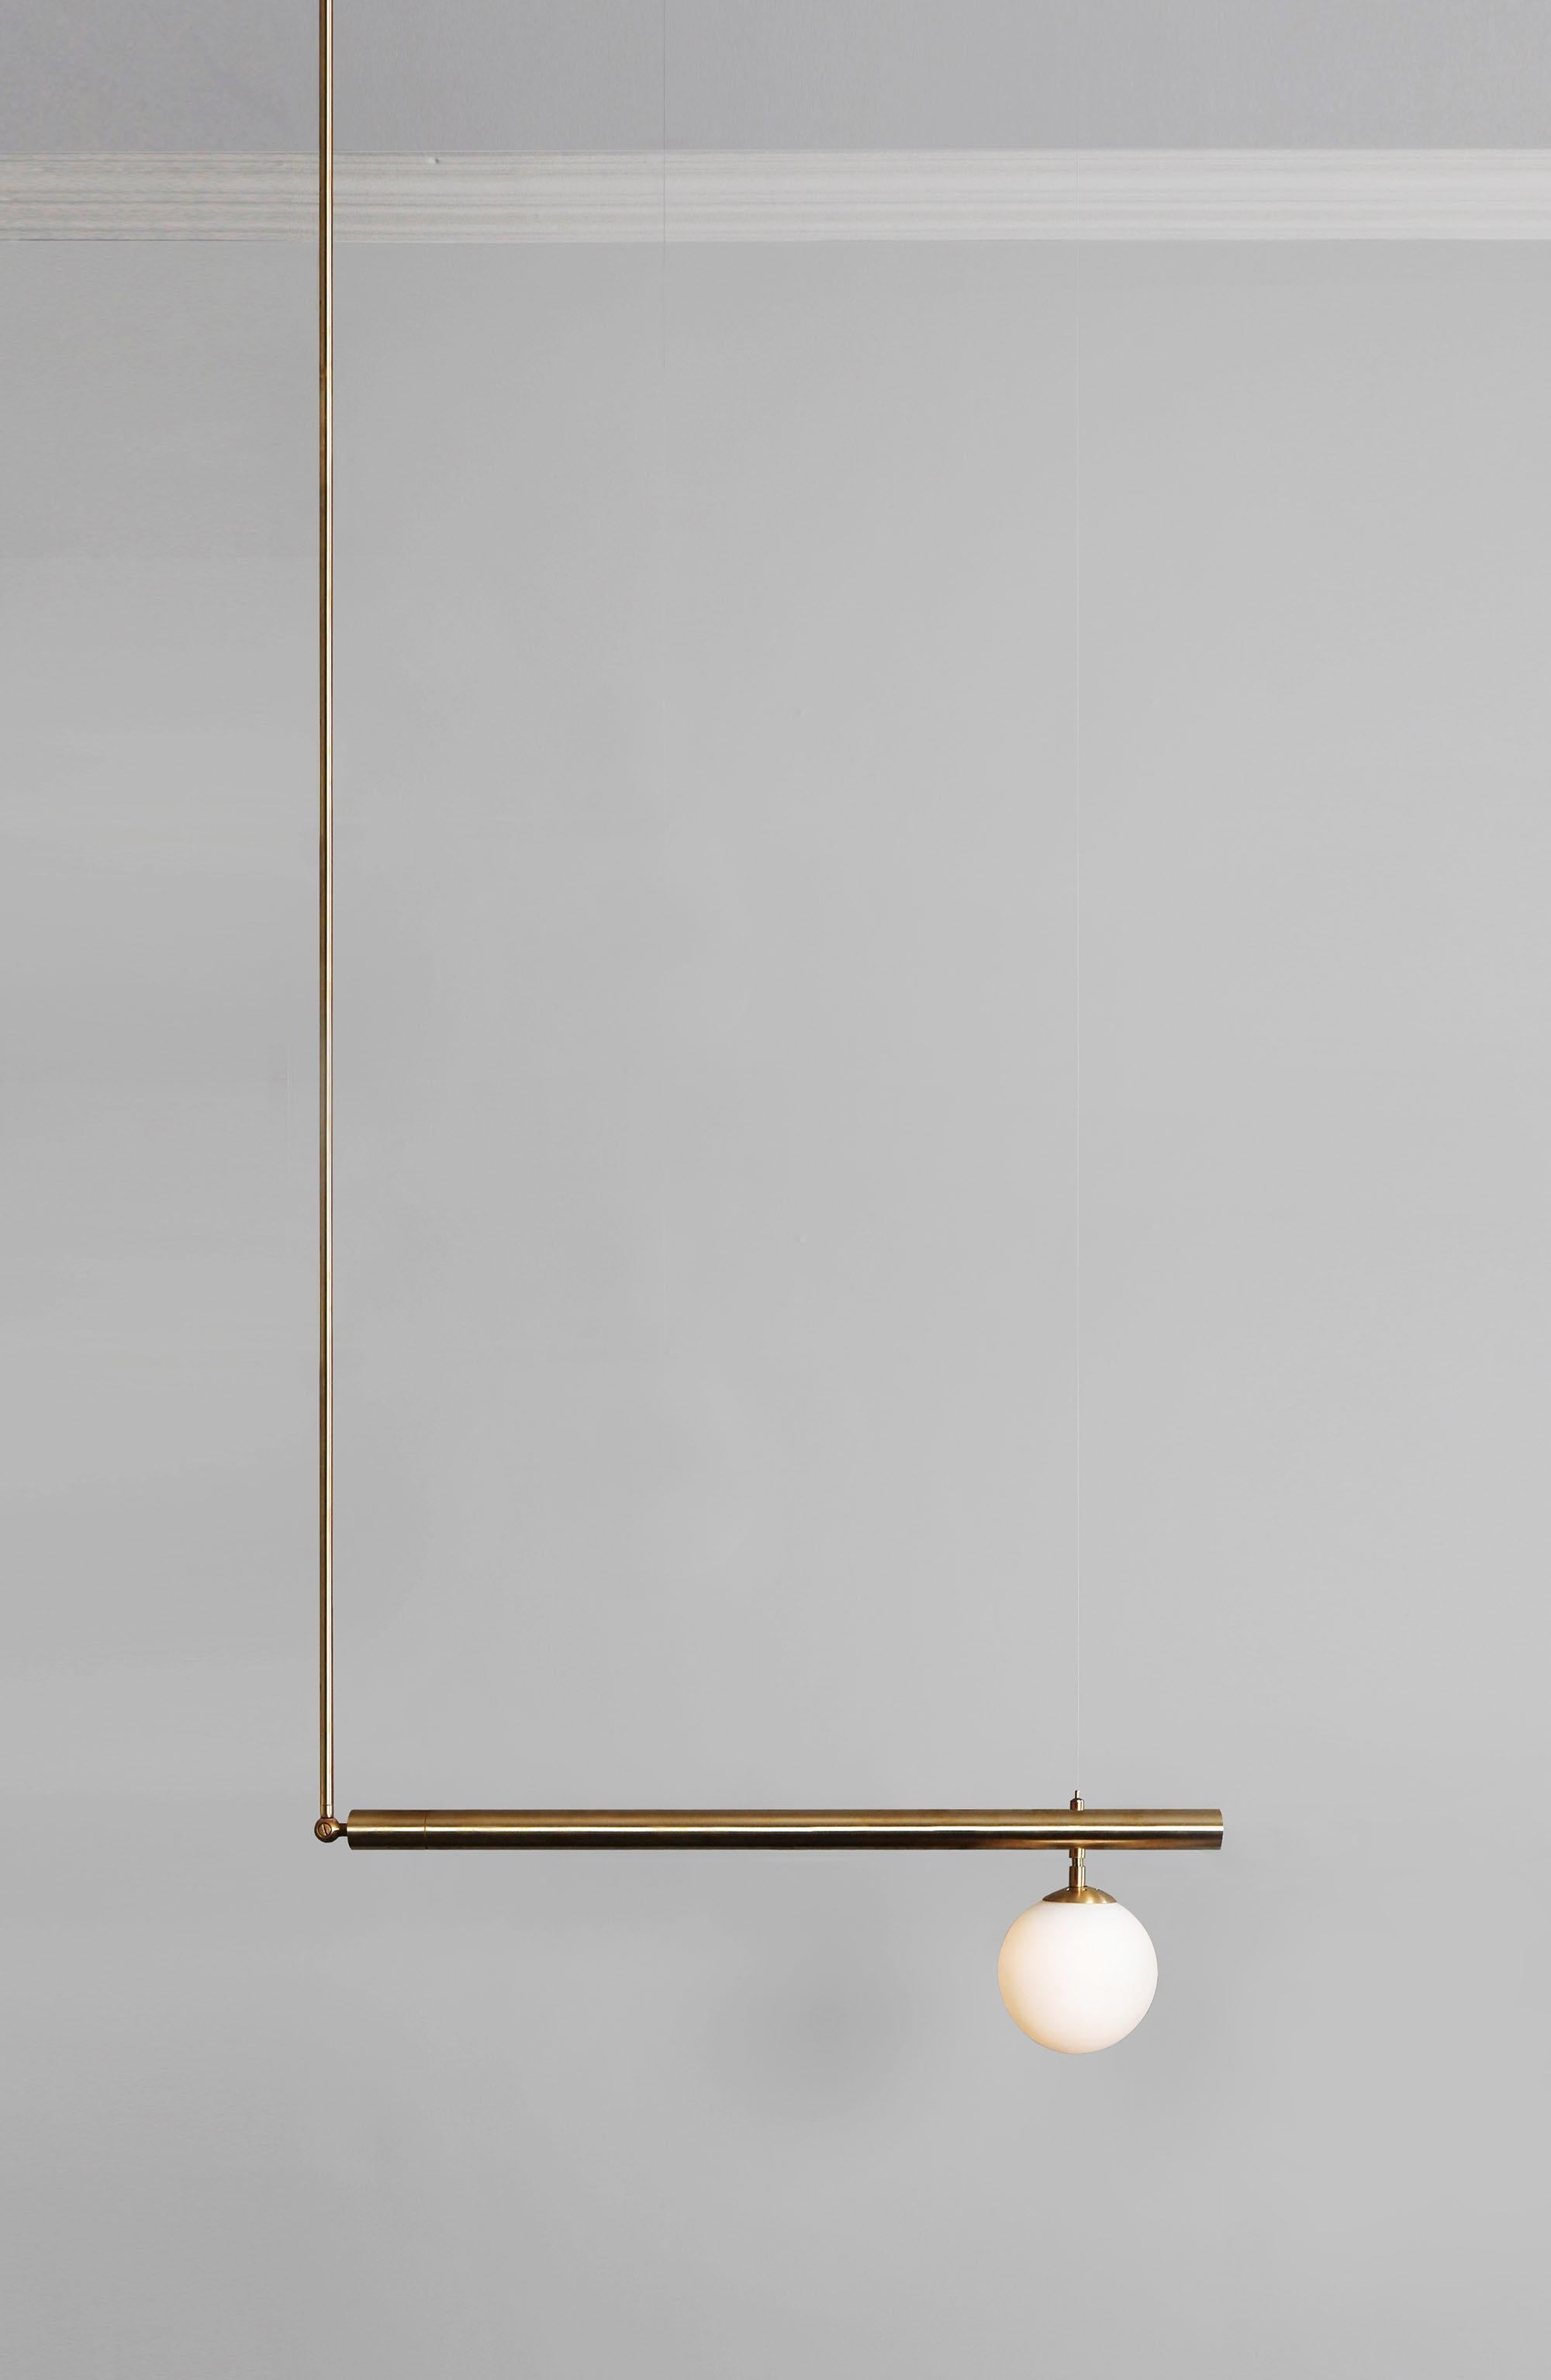 Contemporary Sculpted Brass Pendant, Satellite 1 by Paul Matter

Satellite is inspired by the conceptual and minimalist movement of the 1960s and 1970s. These light sculptures are fundamentally geometric and architectonic.
They rely on the cube as